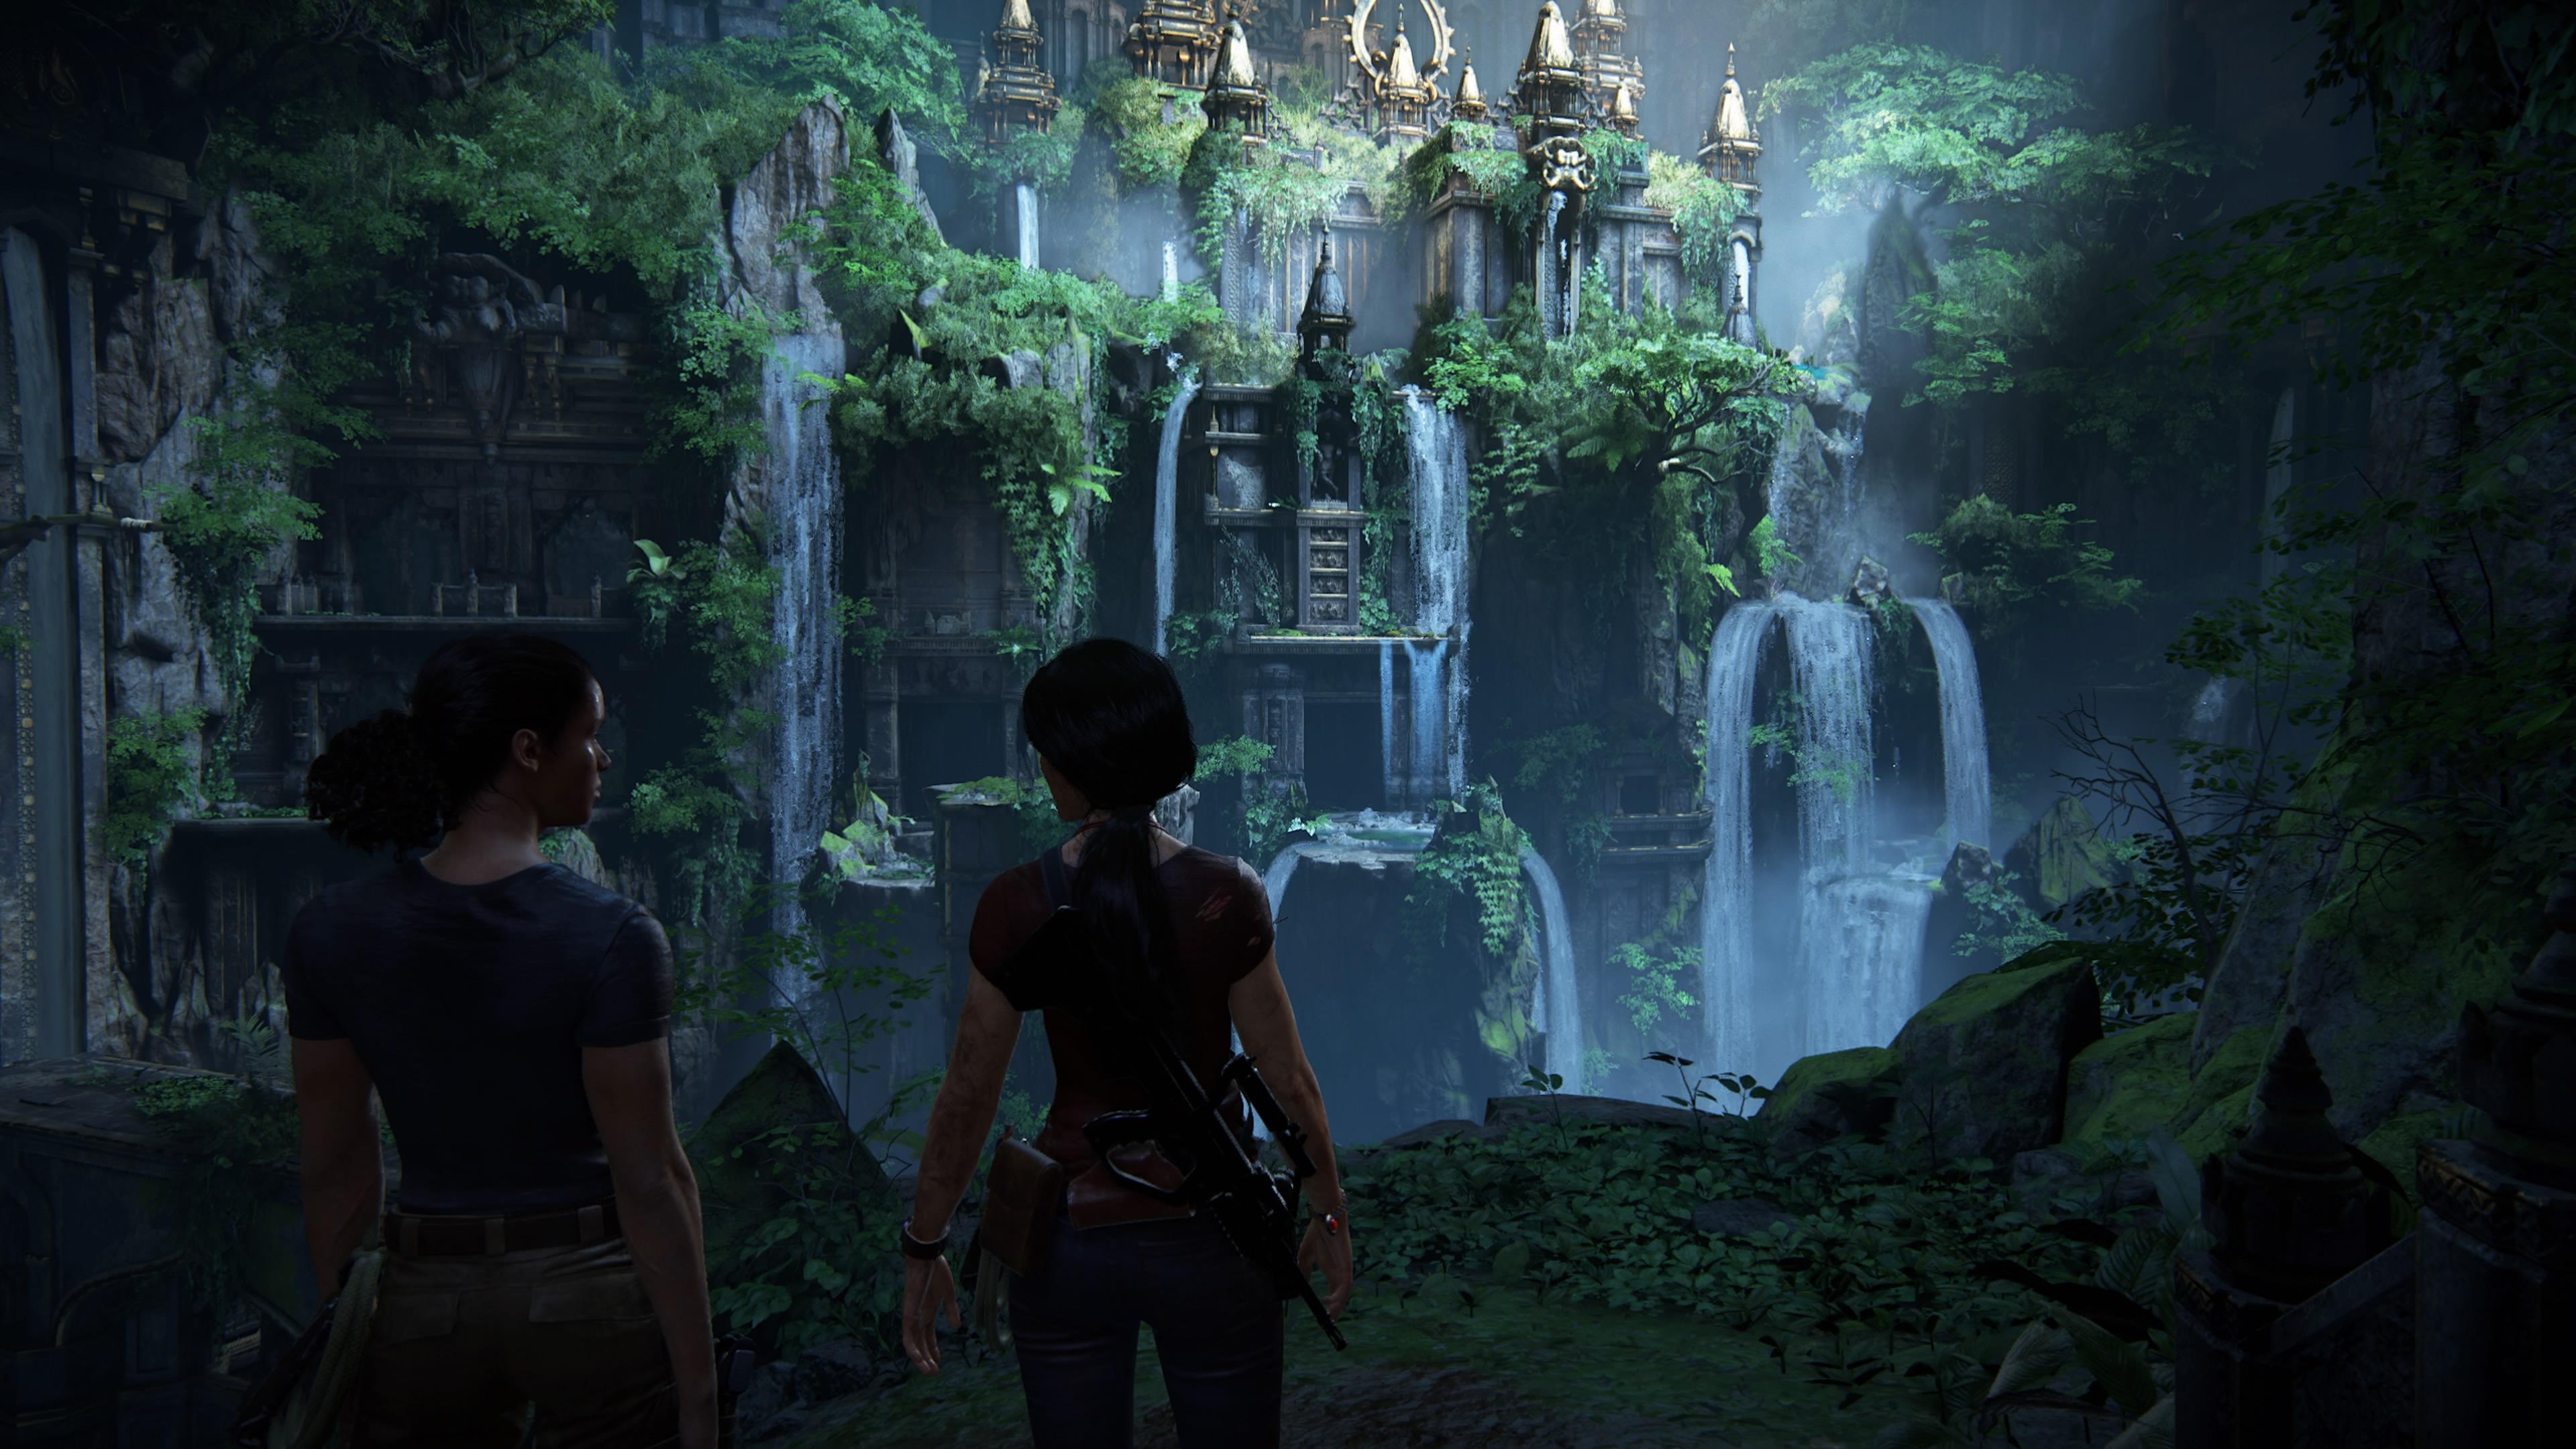 We are losing game. Анчартед 4 наследие. Uncharted: the Lost Legacy. Квесты Uncharted: the Lost Legacy. Uncharted Lost Legacy screenshots.